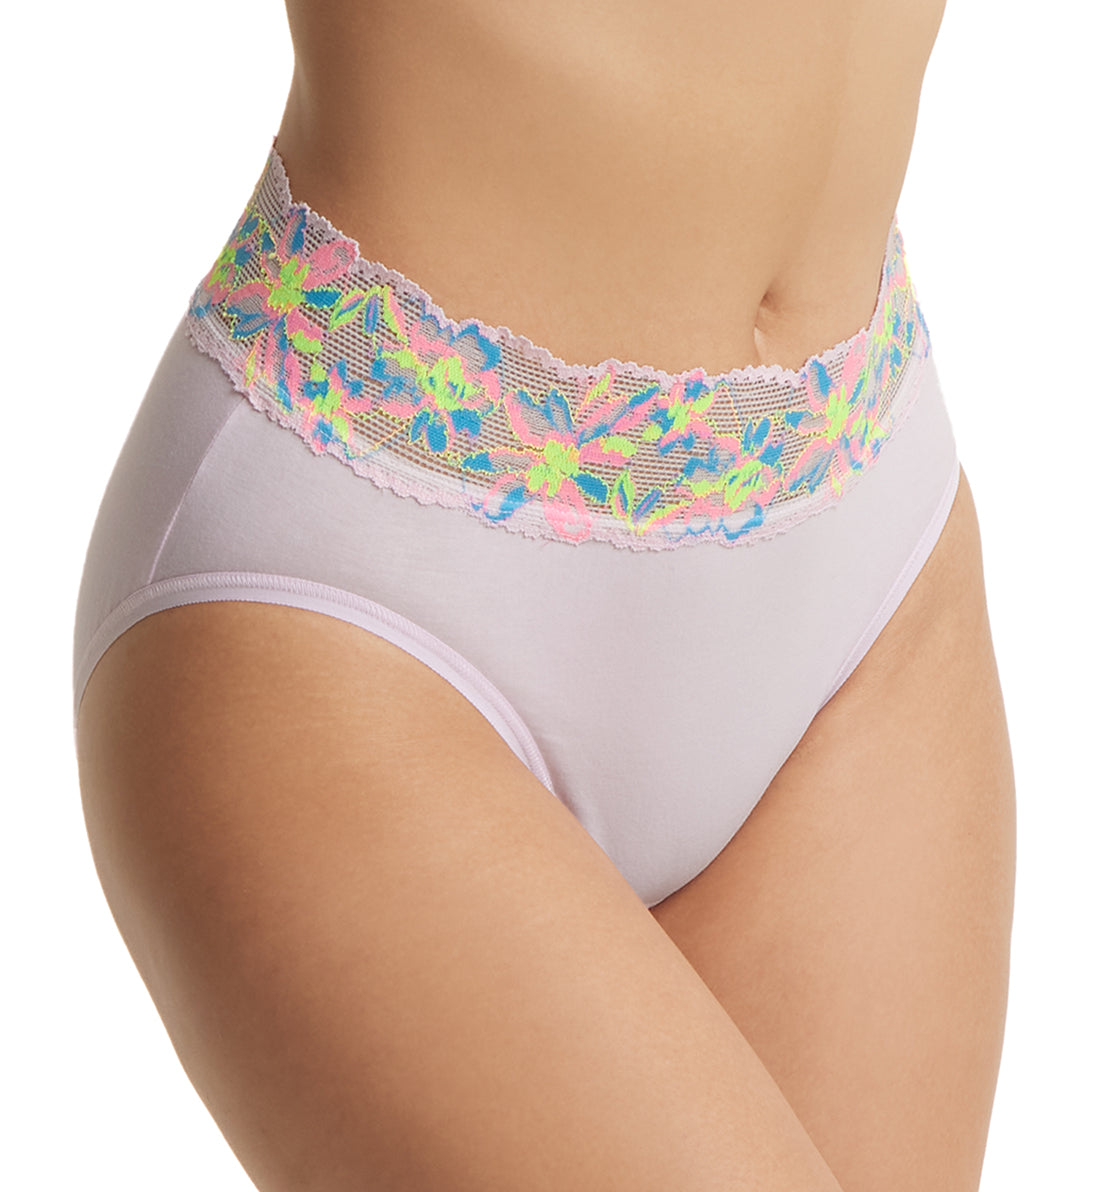 Hanky Panky Cotton-Spandex French Brief (892462),Small,Pink Multi - Pink Multi,Small